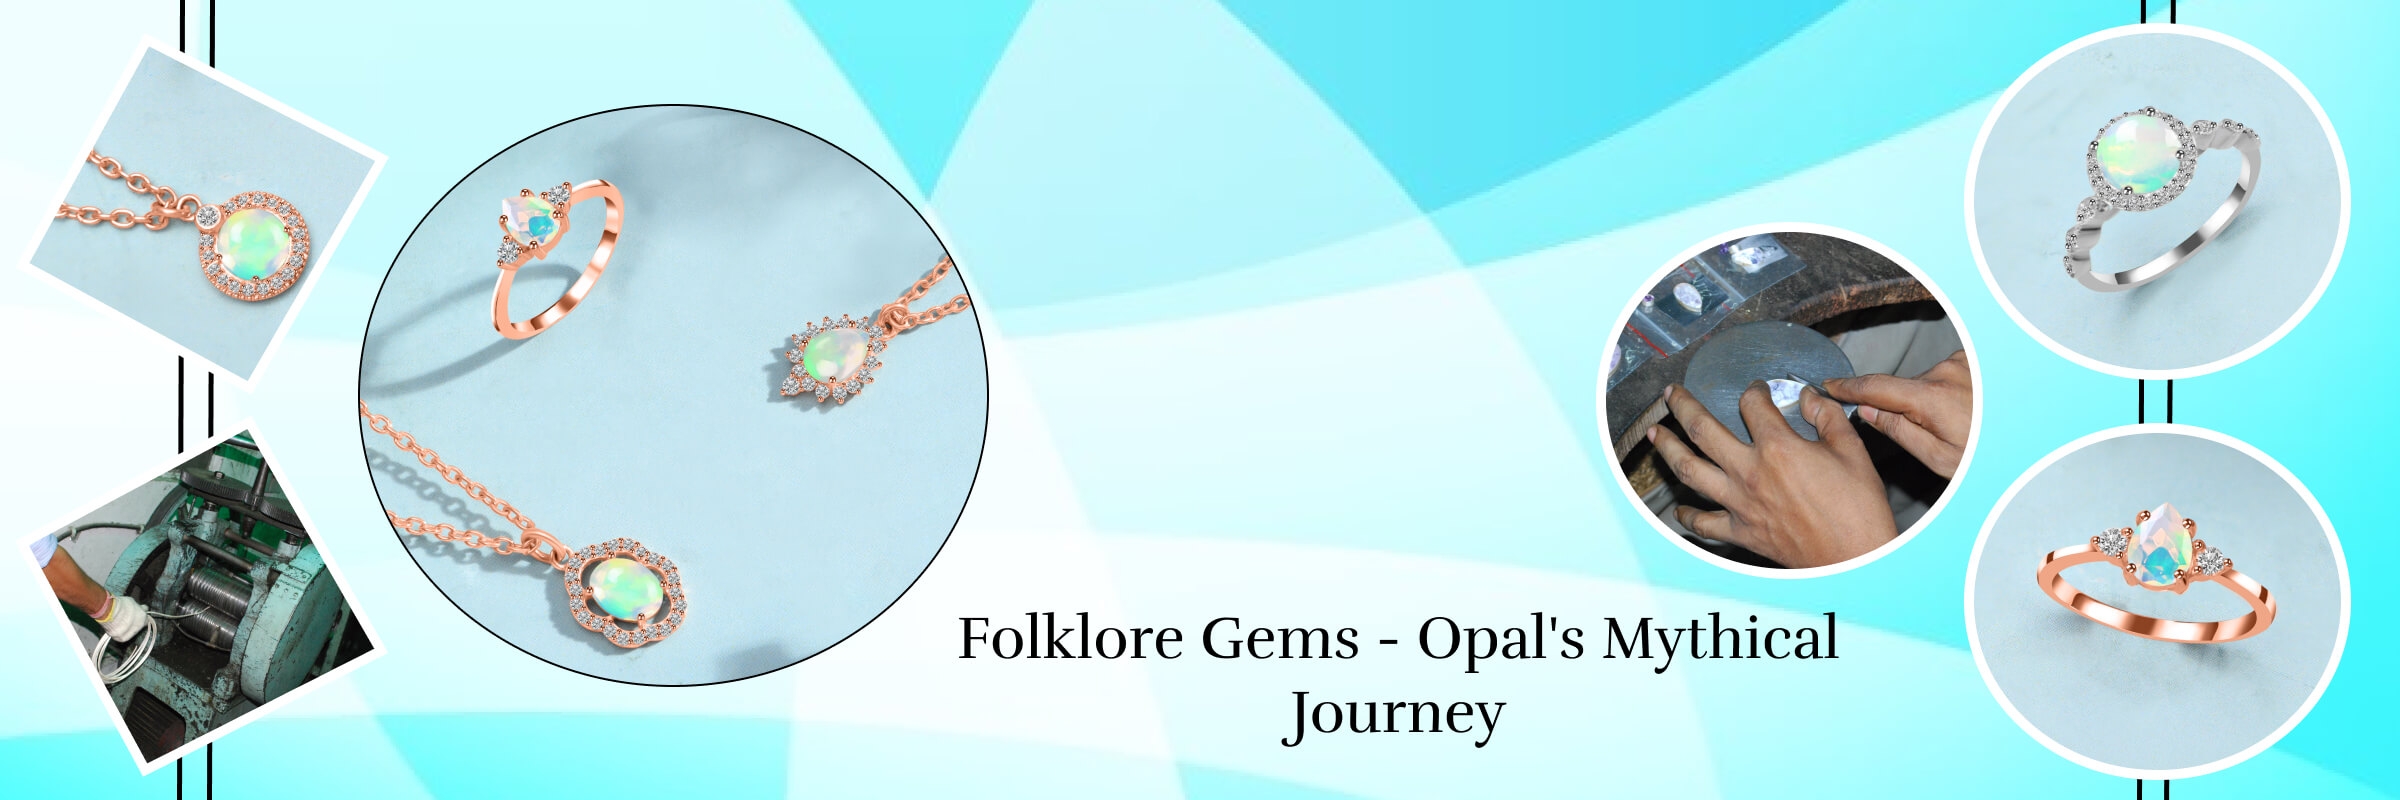 Opal’s Mythical Origins & Ancient Folklore